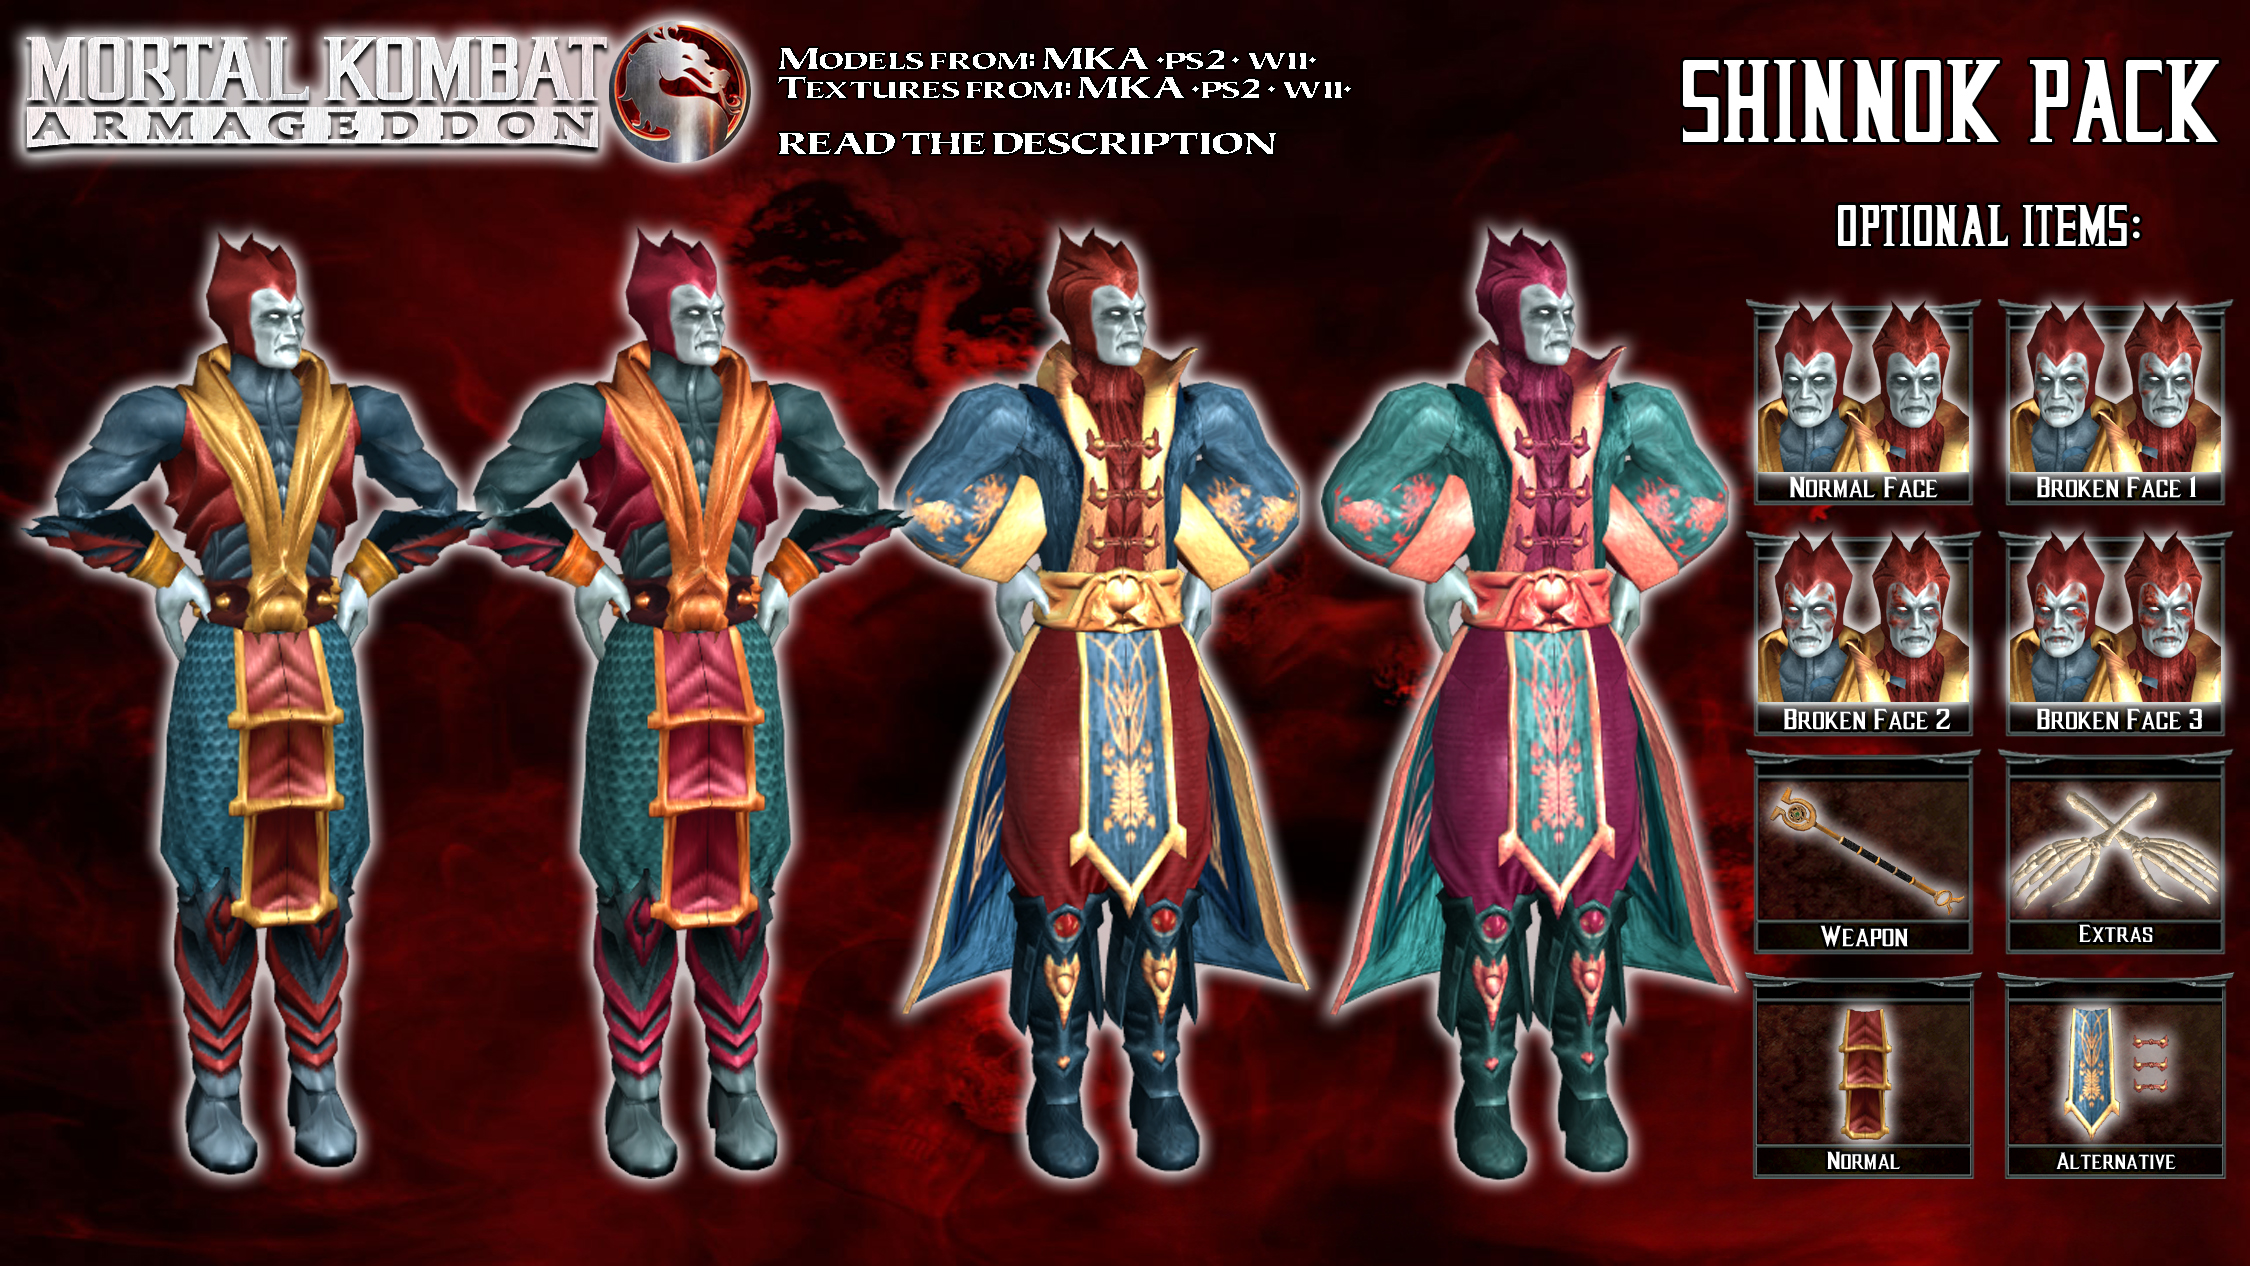 MK Deadly Alliance - Shang Tsung [XPS] by 972oTeV on DeviantArt